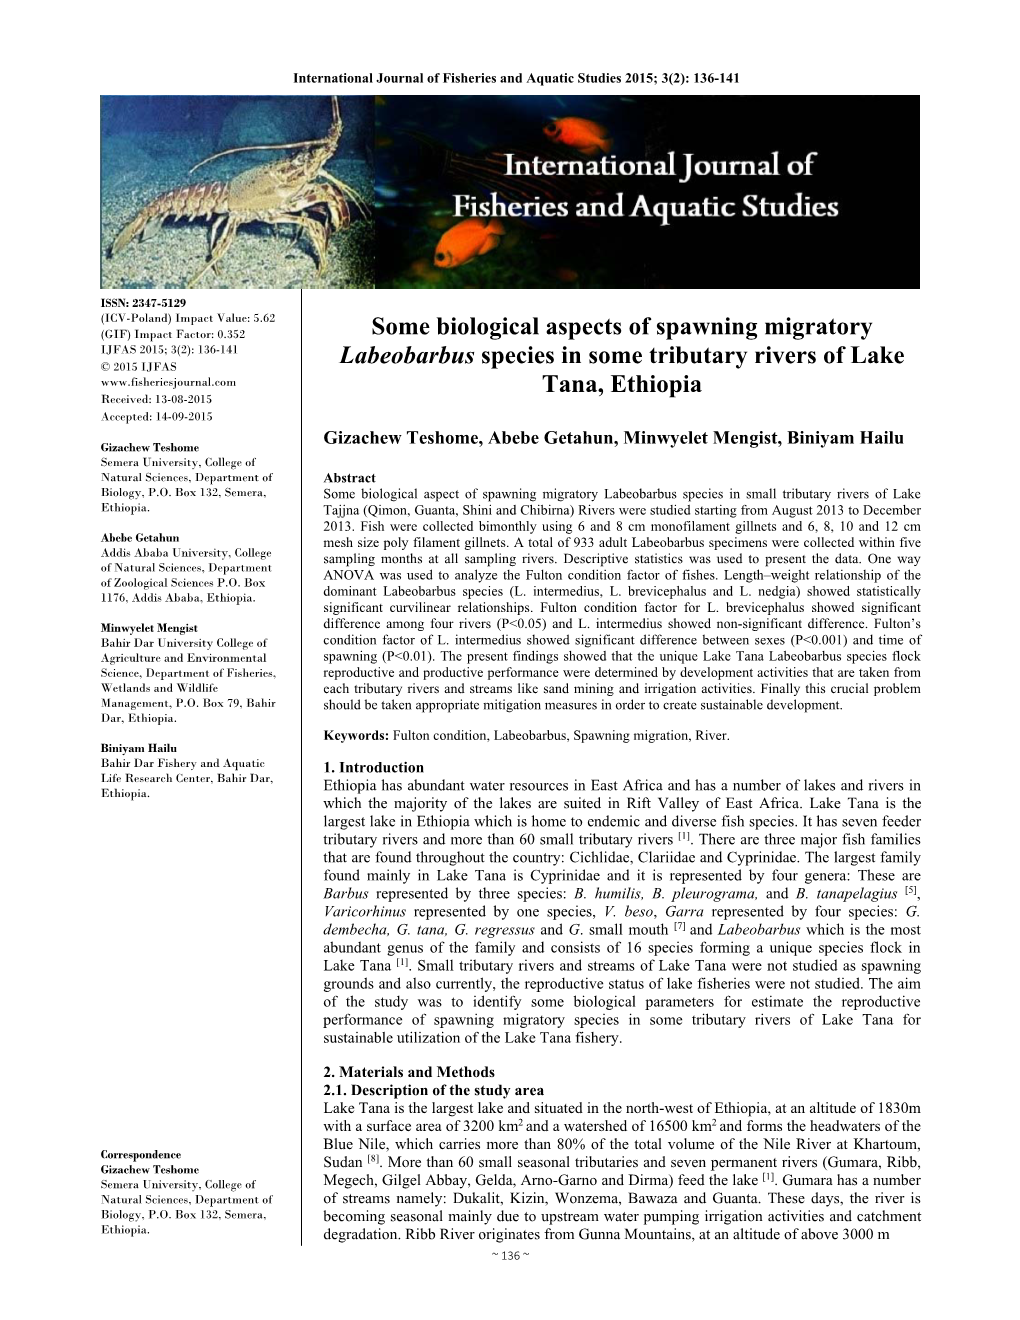 Some Biological Aspects of Spawning Migratory Labeobarbus Species In